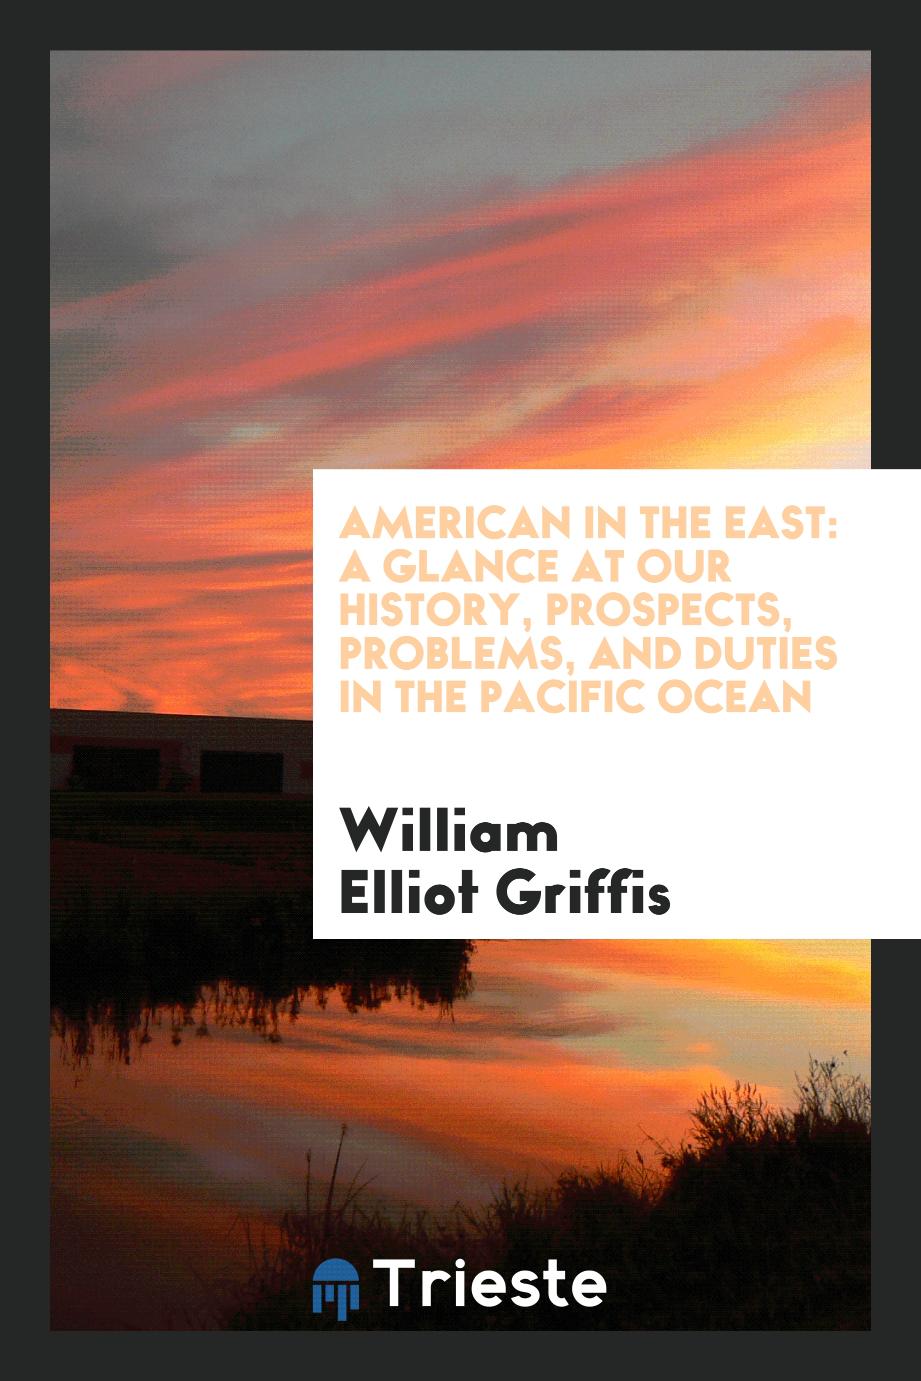 American in the East: A Glance at Our History, Prospects, Problems, and Duties in the Pacific Ocean